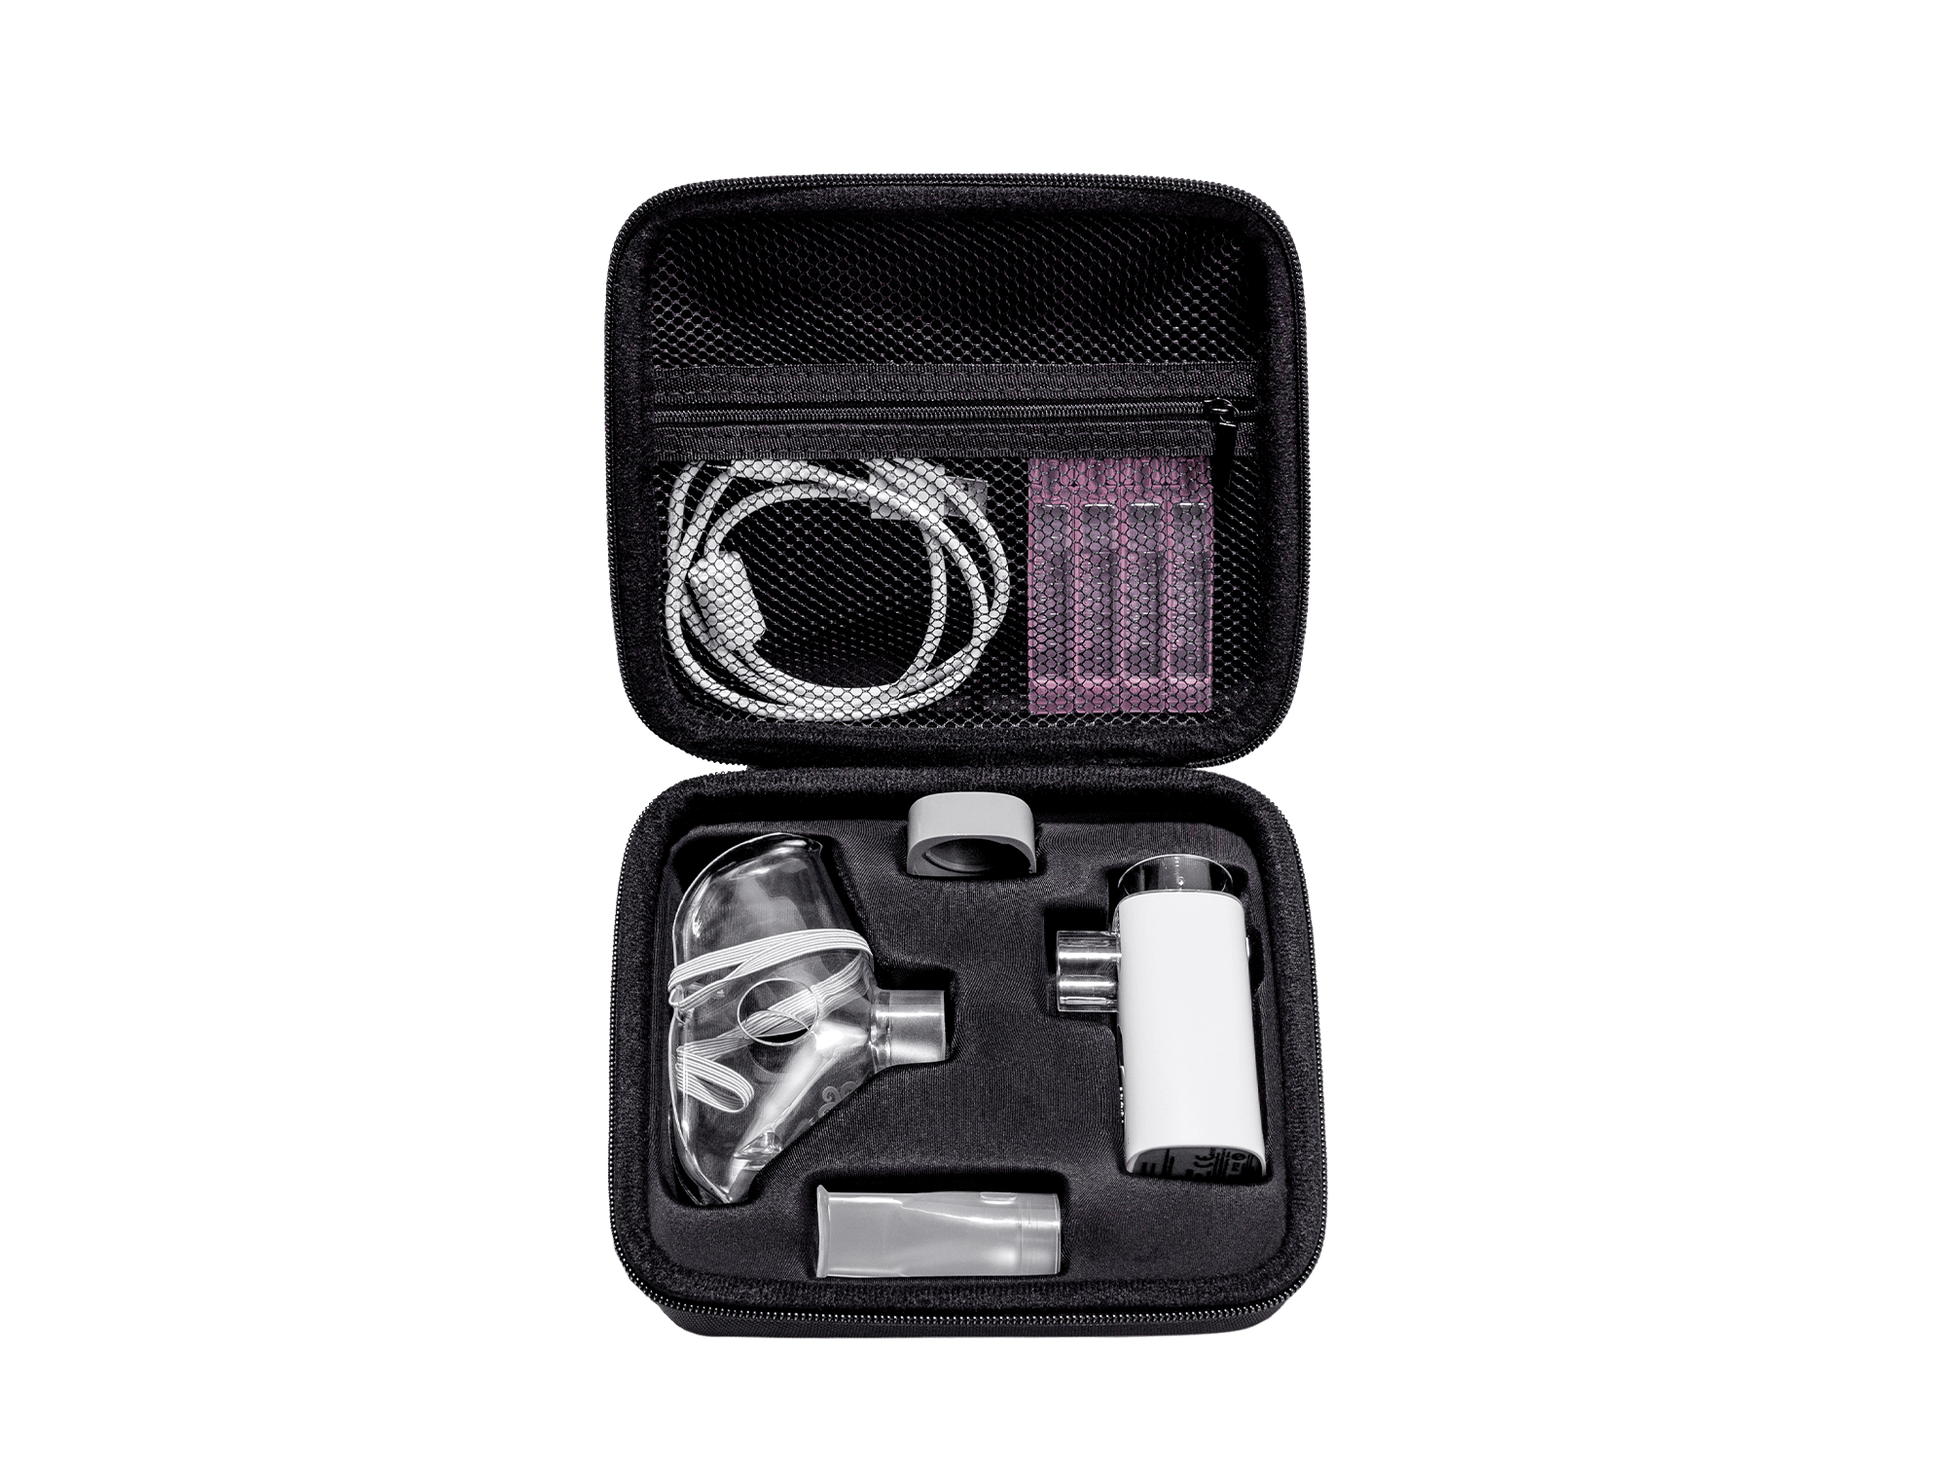 Buy VocalMist Carrying Case to Protect Your Nebulizer